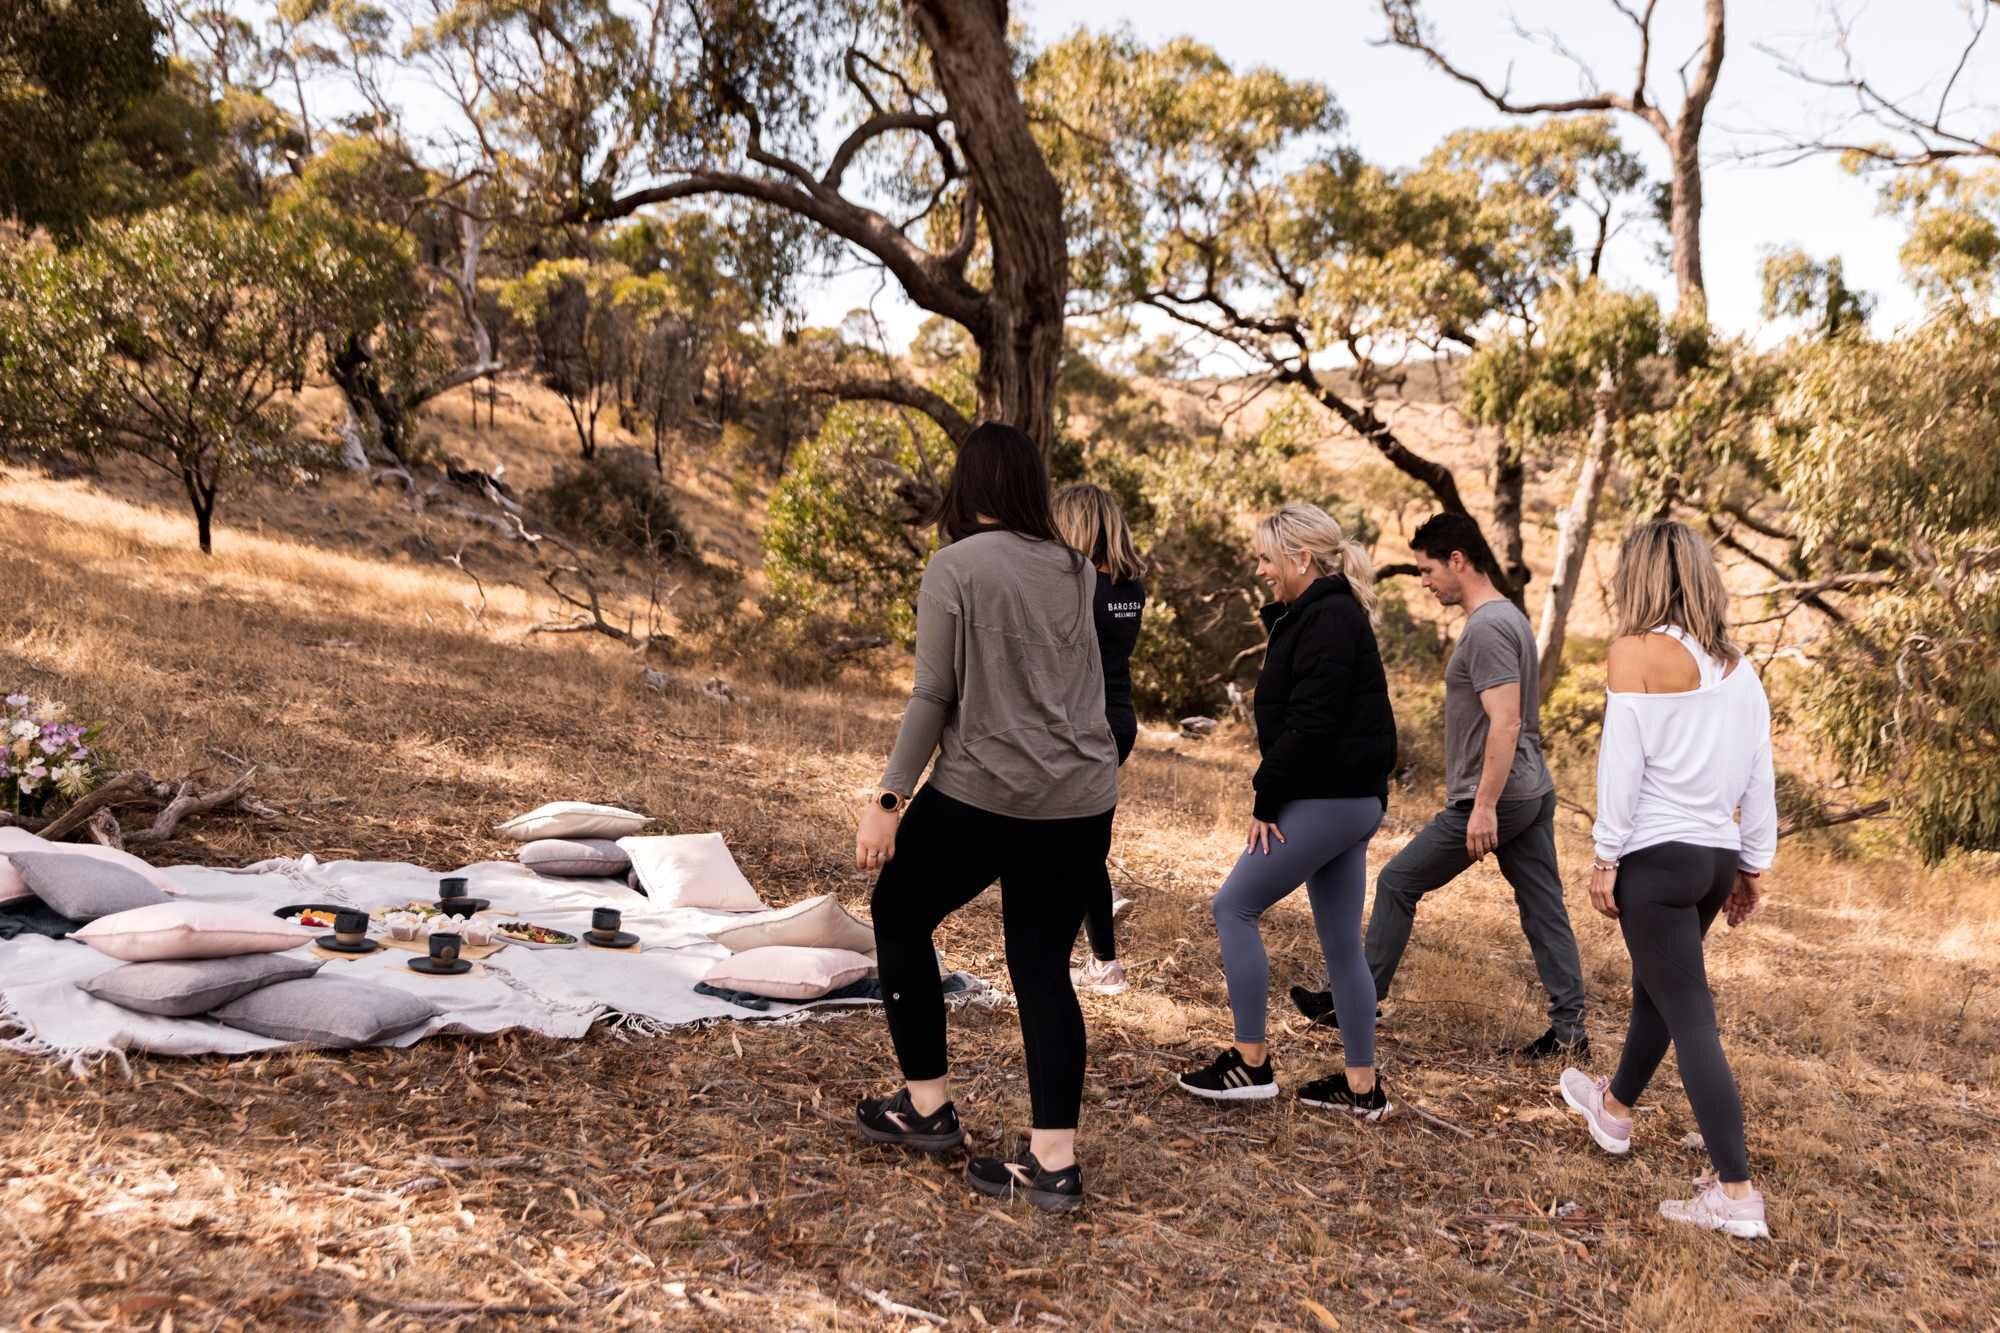 As the season is changing it's the perfect weather for our walking experiences. A beautiful way to bring some balance to your stay in the Barossa. 💙

#kaiserridge #mybarossa #seesouthaustralia #barossawellnessconcierge